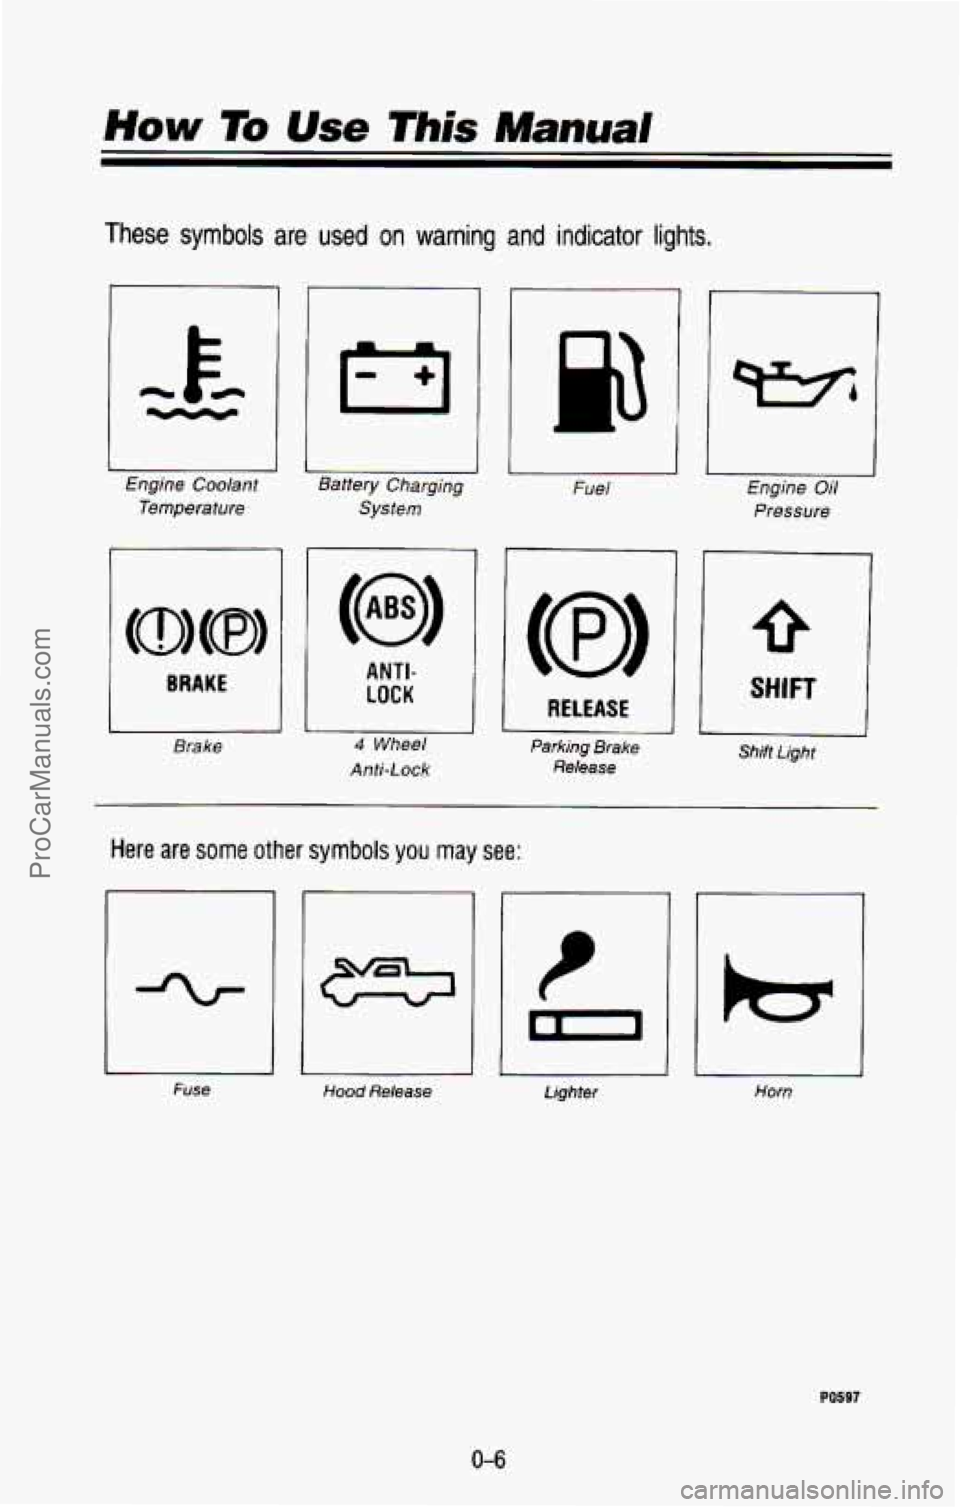 CHEVROLET SUBURBAN 1993  Owners Manual These symbols are used on  warning and indicator lights. 
Engine  Coolant Temperature 
BRAKE 
Brake 
I-, 
Battery  Charging 
System Fuel 
ANTI- 
LOCK 1 
1 4 Wheel 
Anti-Lock 
RELEASE 
Parking  Brake 
